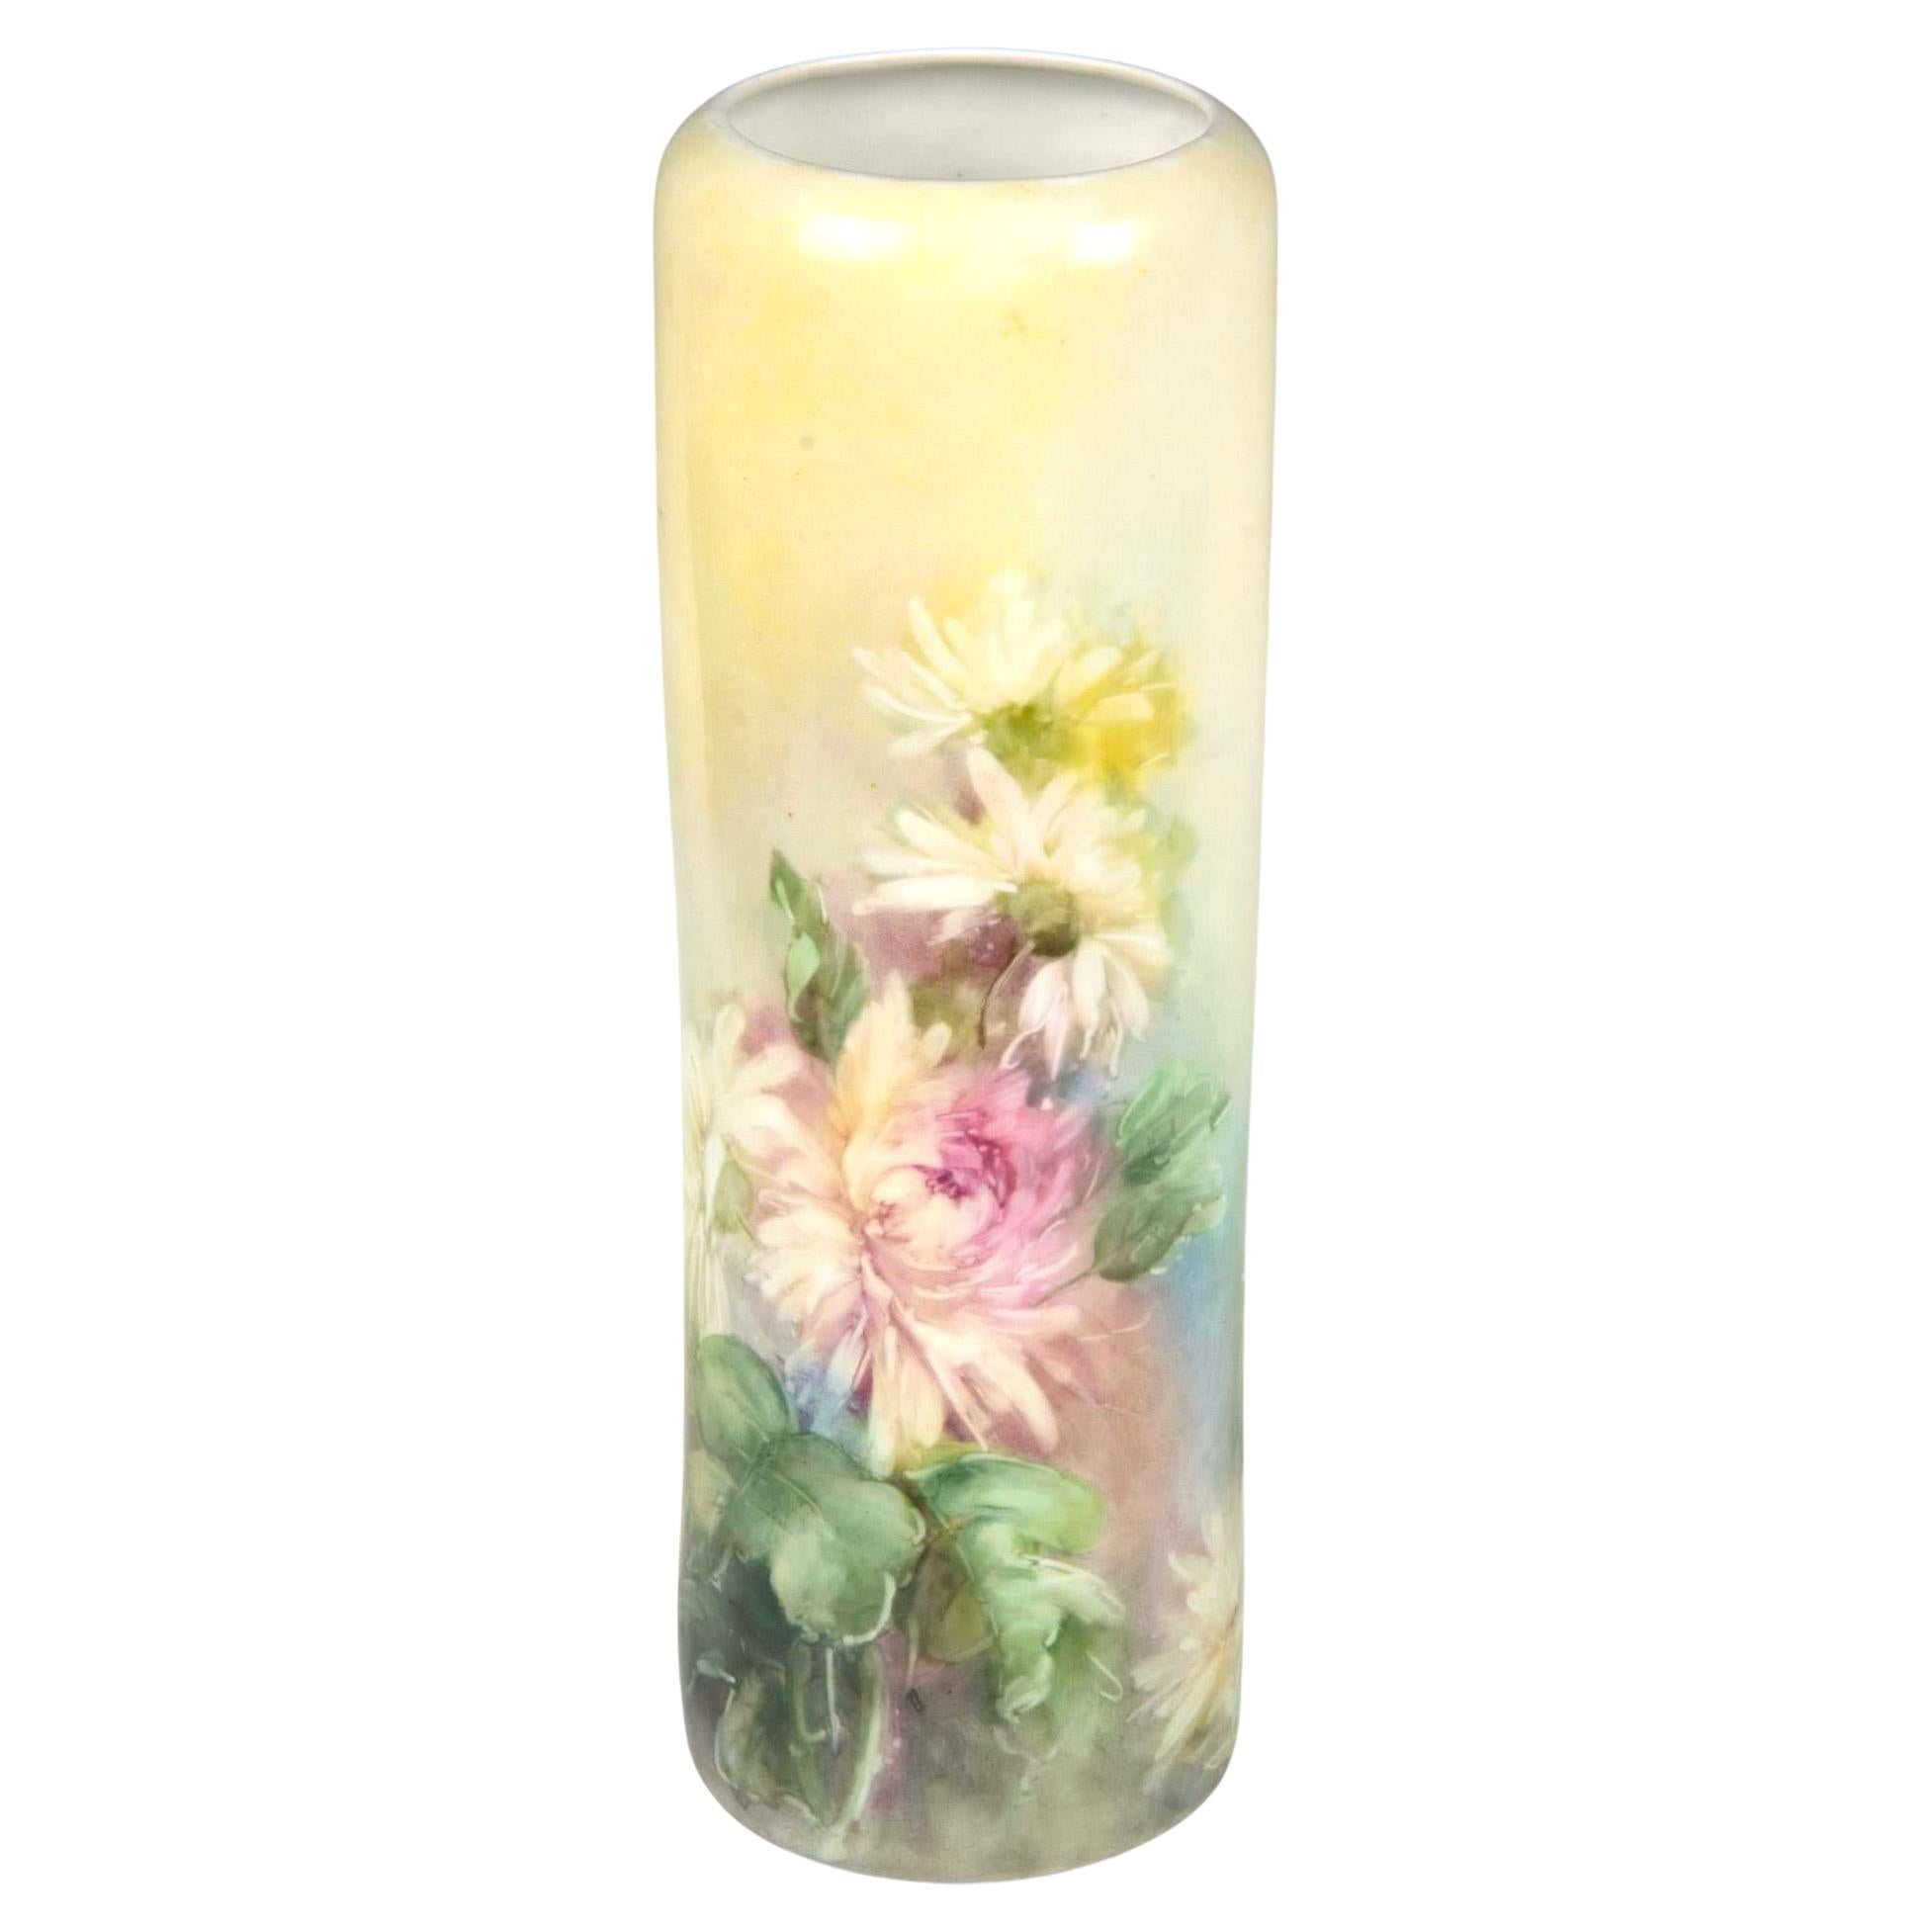 Presenting an exquisite antique hand-painted porcelain floral vase from Vienna, Austria, crafted by the renowned PH Leonard Co. This stunning vase showcases a beautiful arrangement of floral and foliate designs, featuring vibrant pink and purple